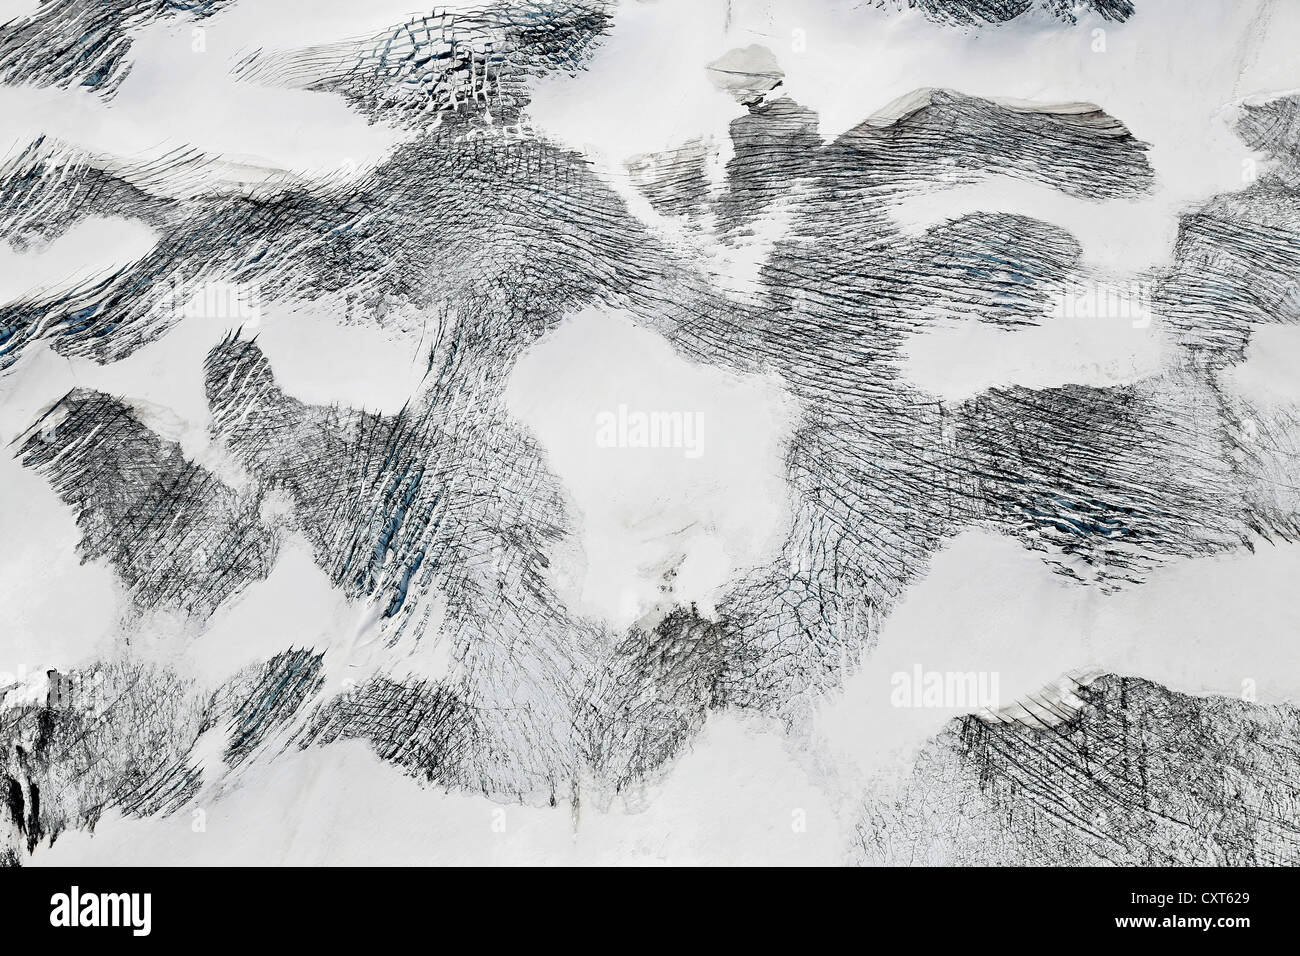 Aerial view, lines and ice crevices in the ice and snow of the Vatnajoekull glacier, Iceland, Europe Stock Photo